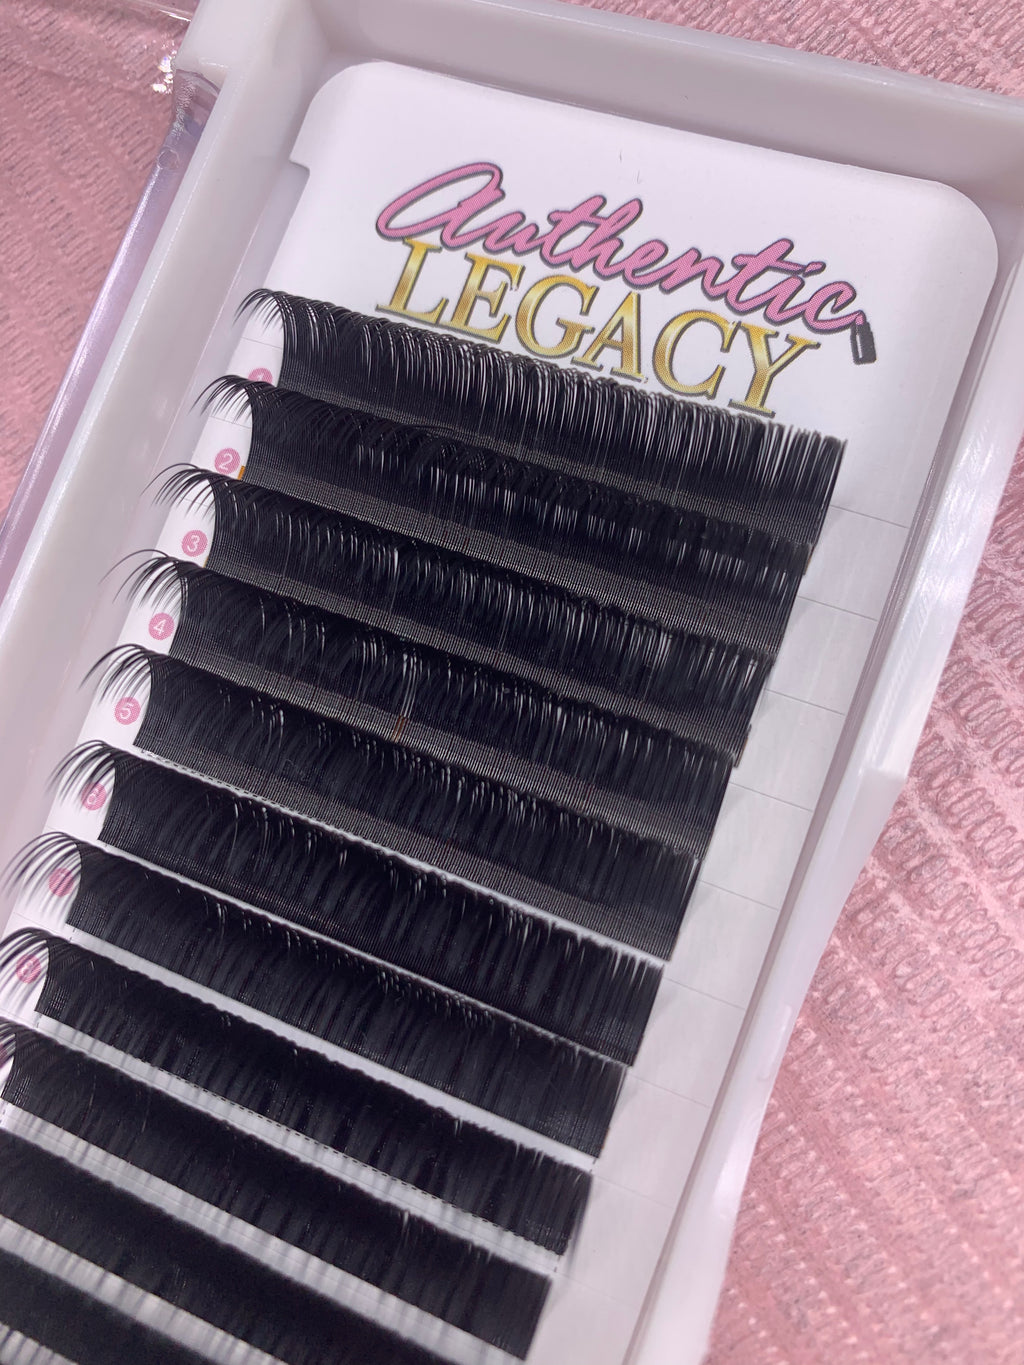 CLASSIC Lash Extension Trays - Authentic Legacy